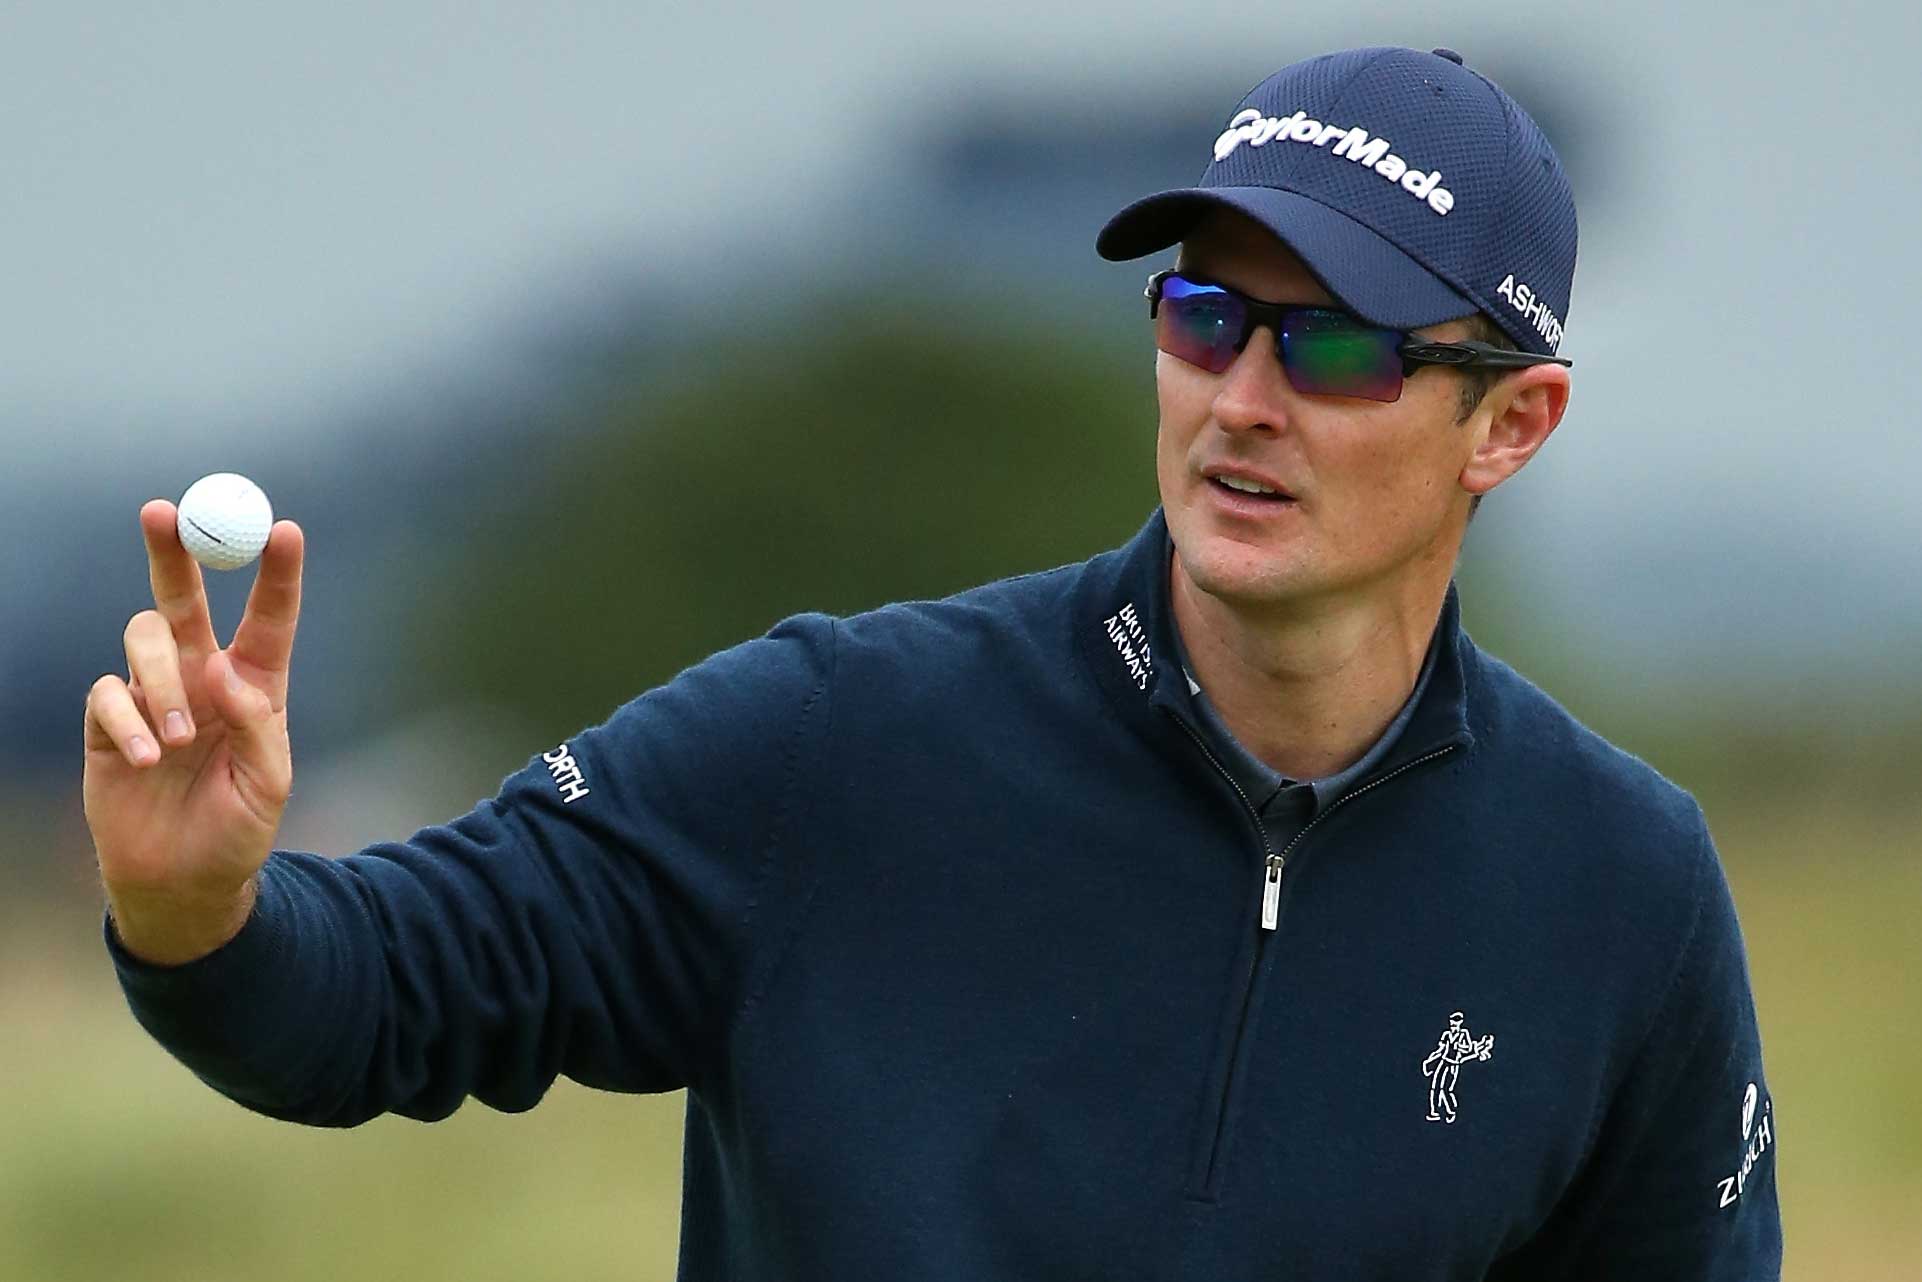 Justin Rose uses a TaylorMade Tour Preferred X ball marked with '99'